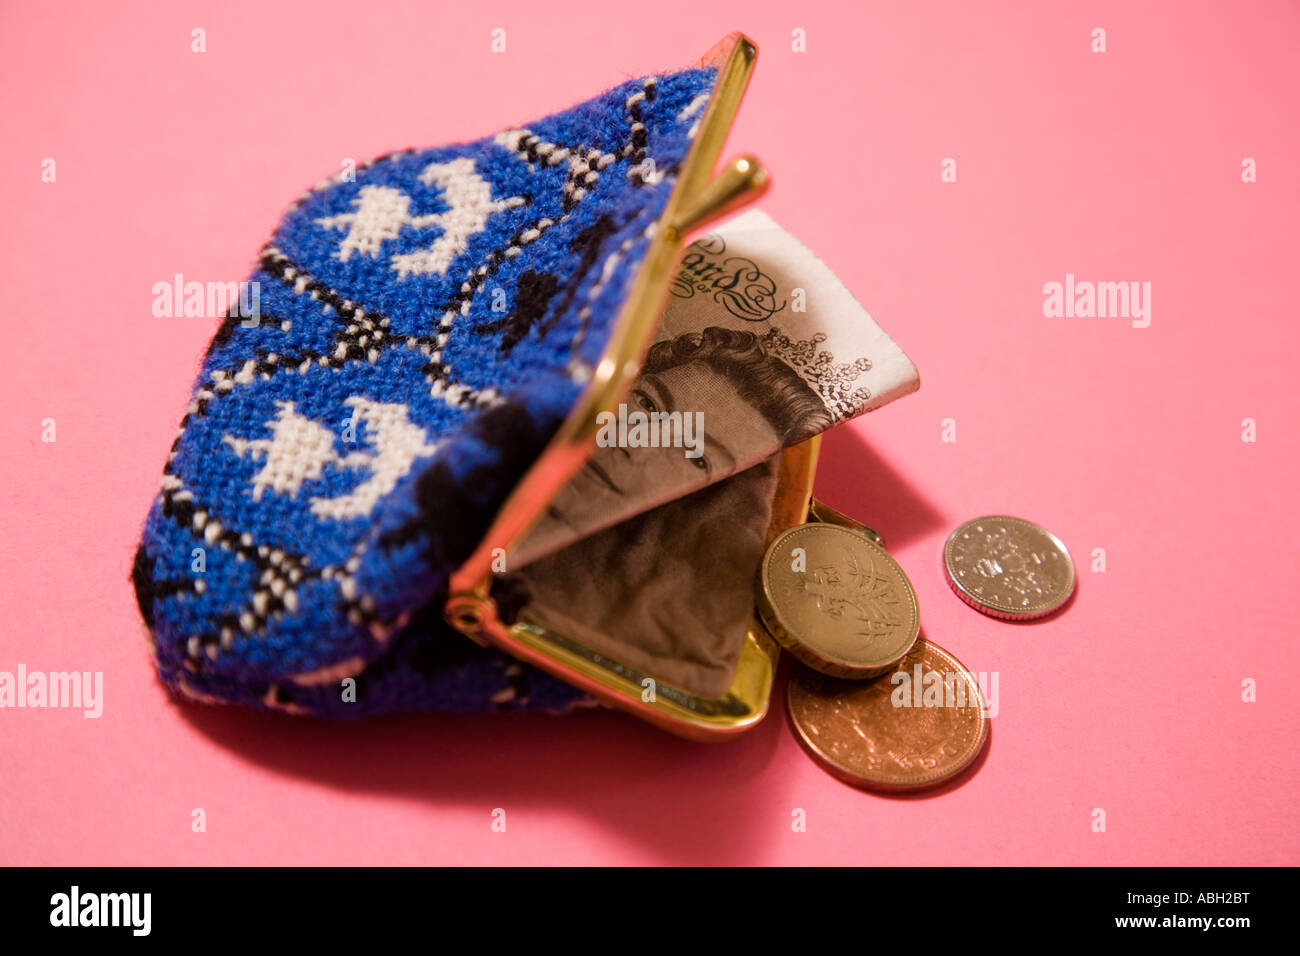 Purse bank note and coins Stock Photo